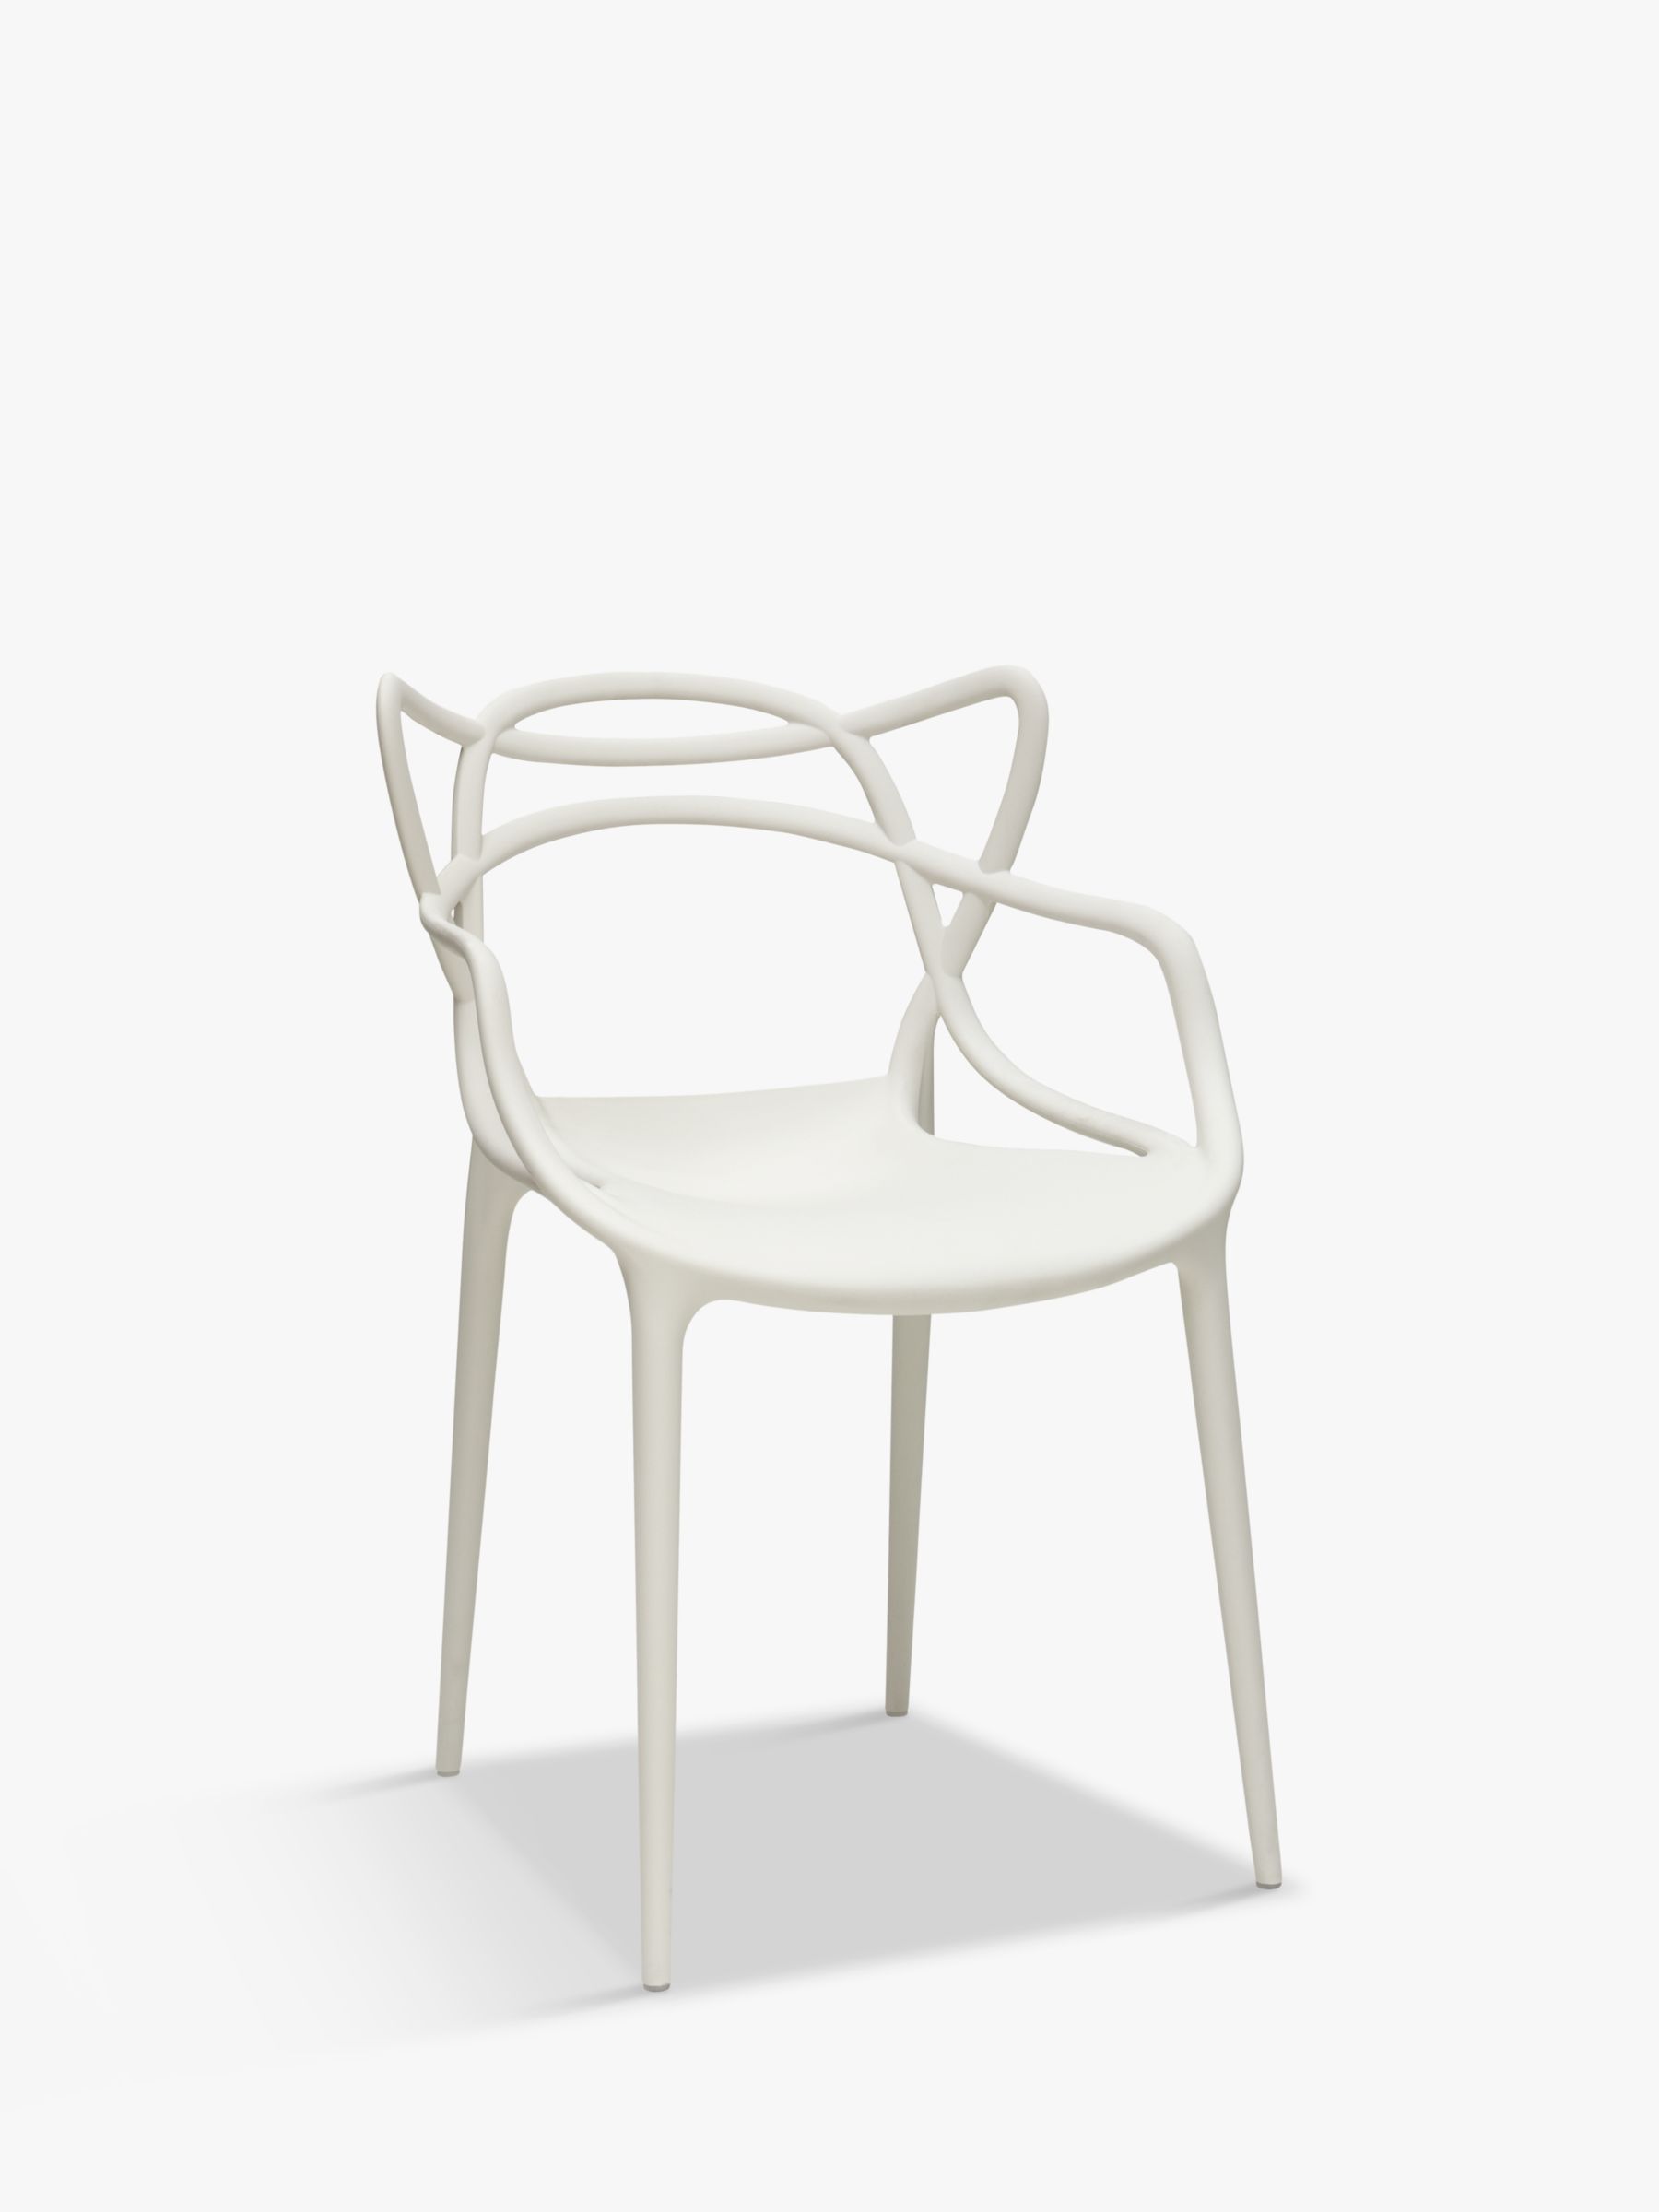 Photo of Philippe starck for kartell masters chair